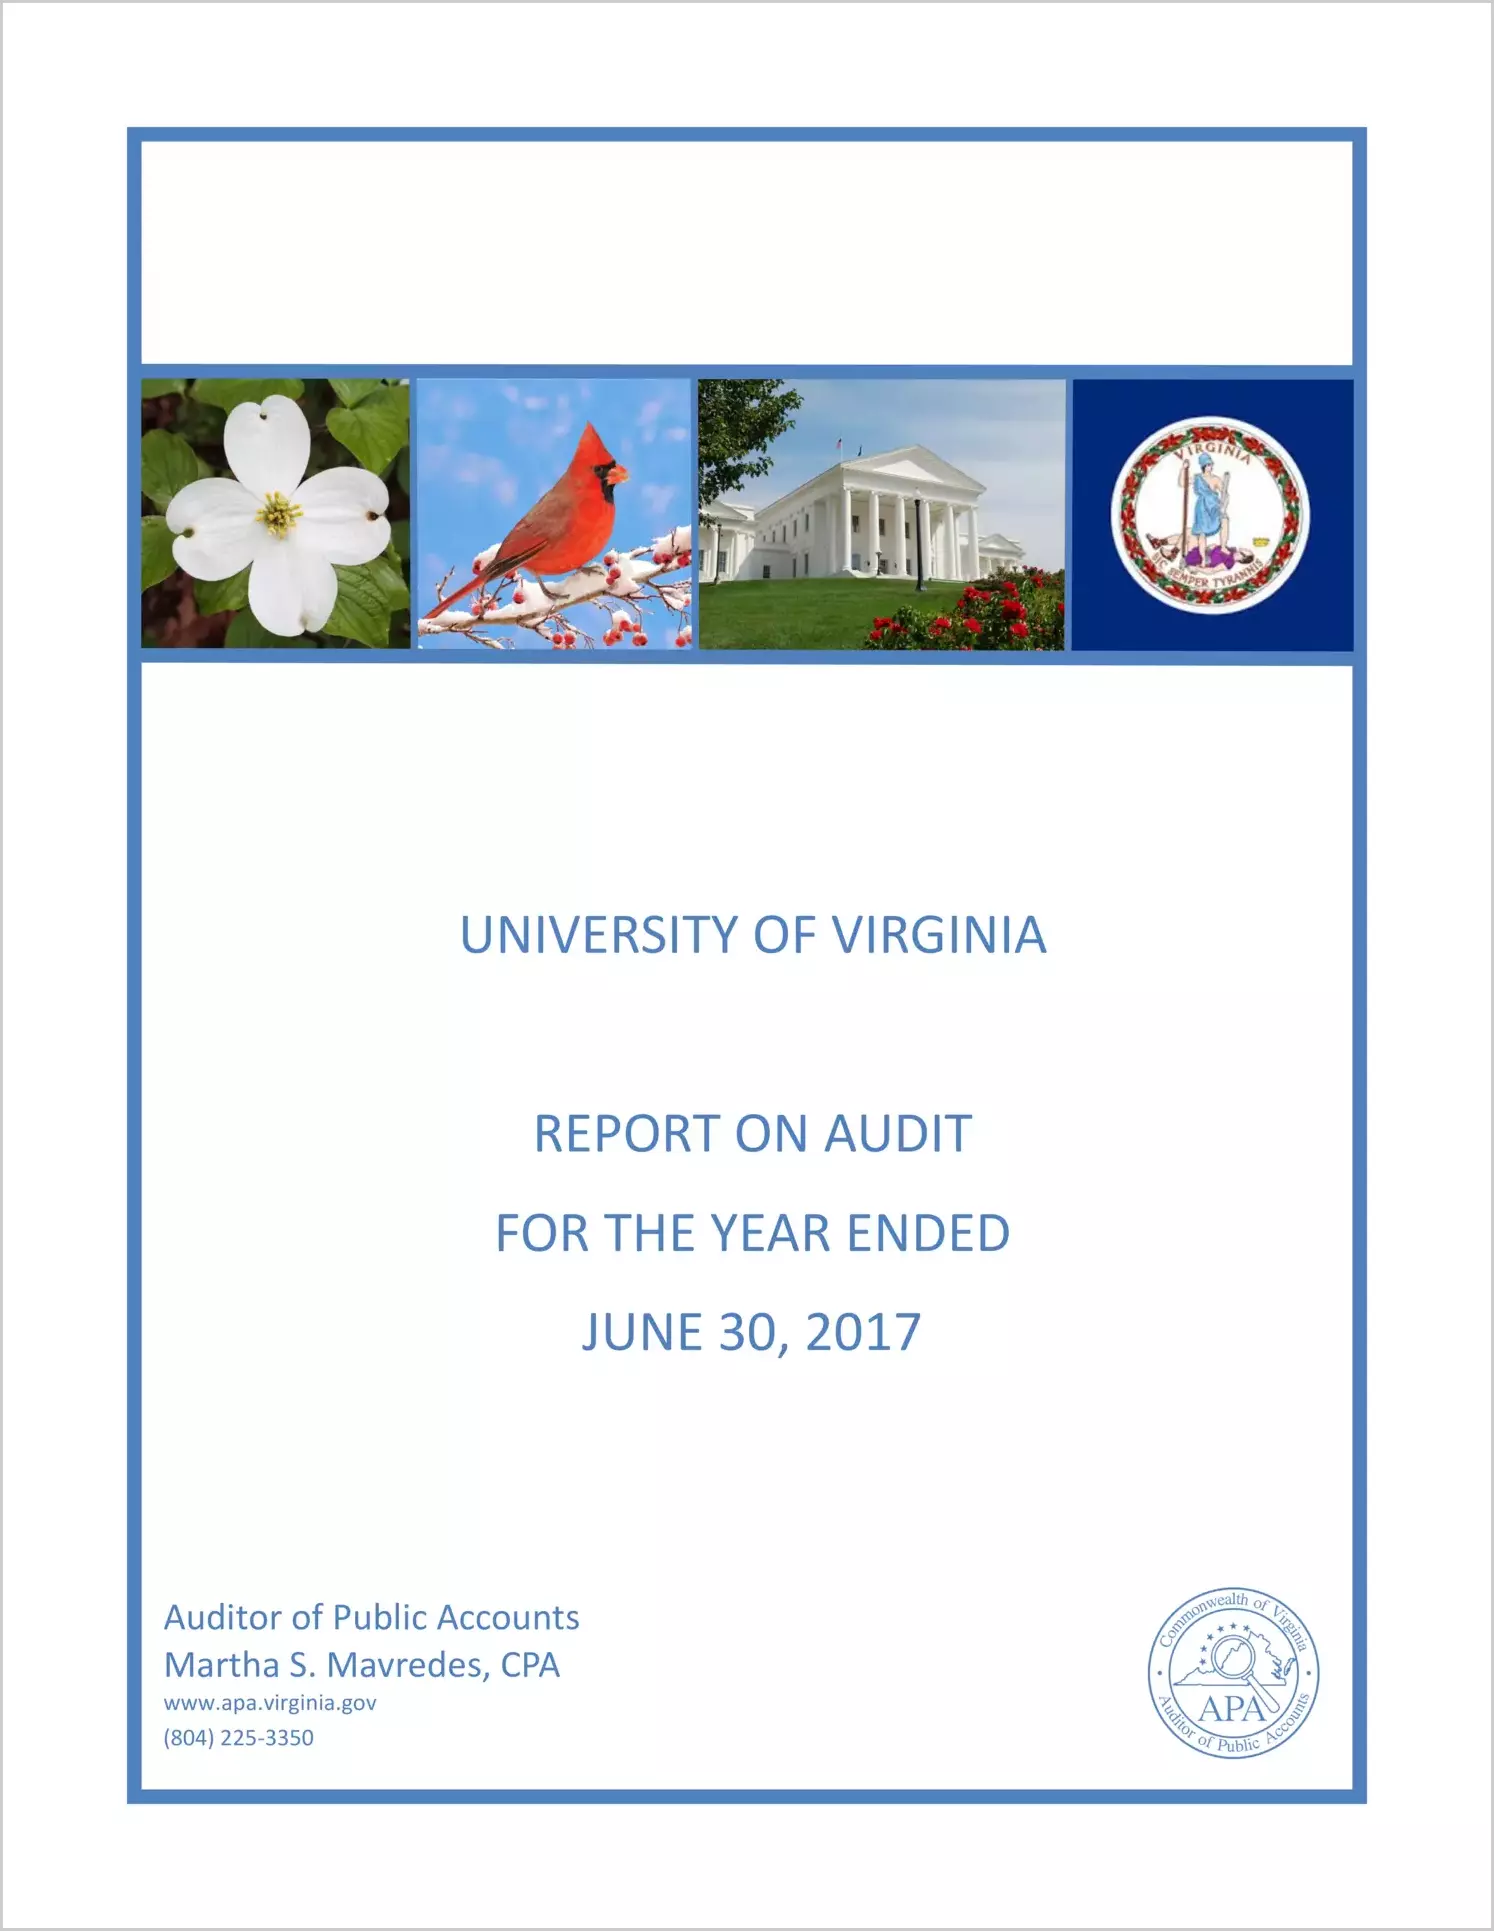 University of Virginia for the year ended June 30, 2017